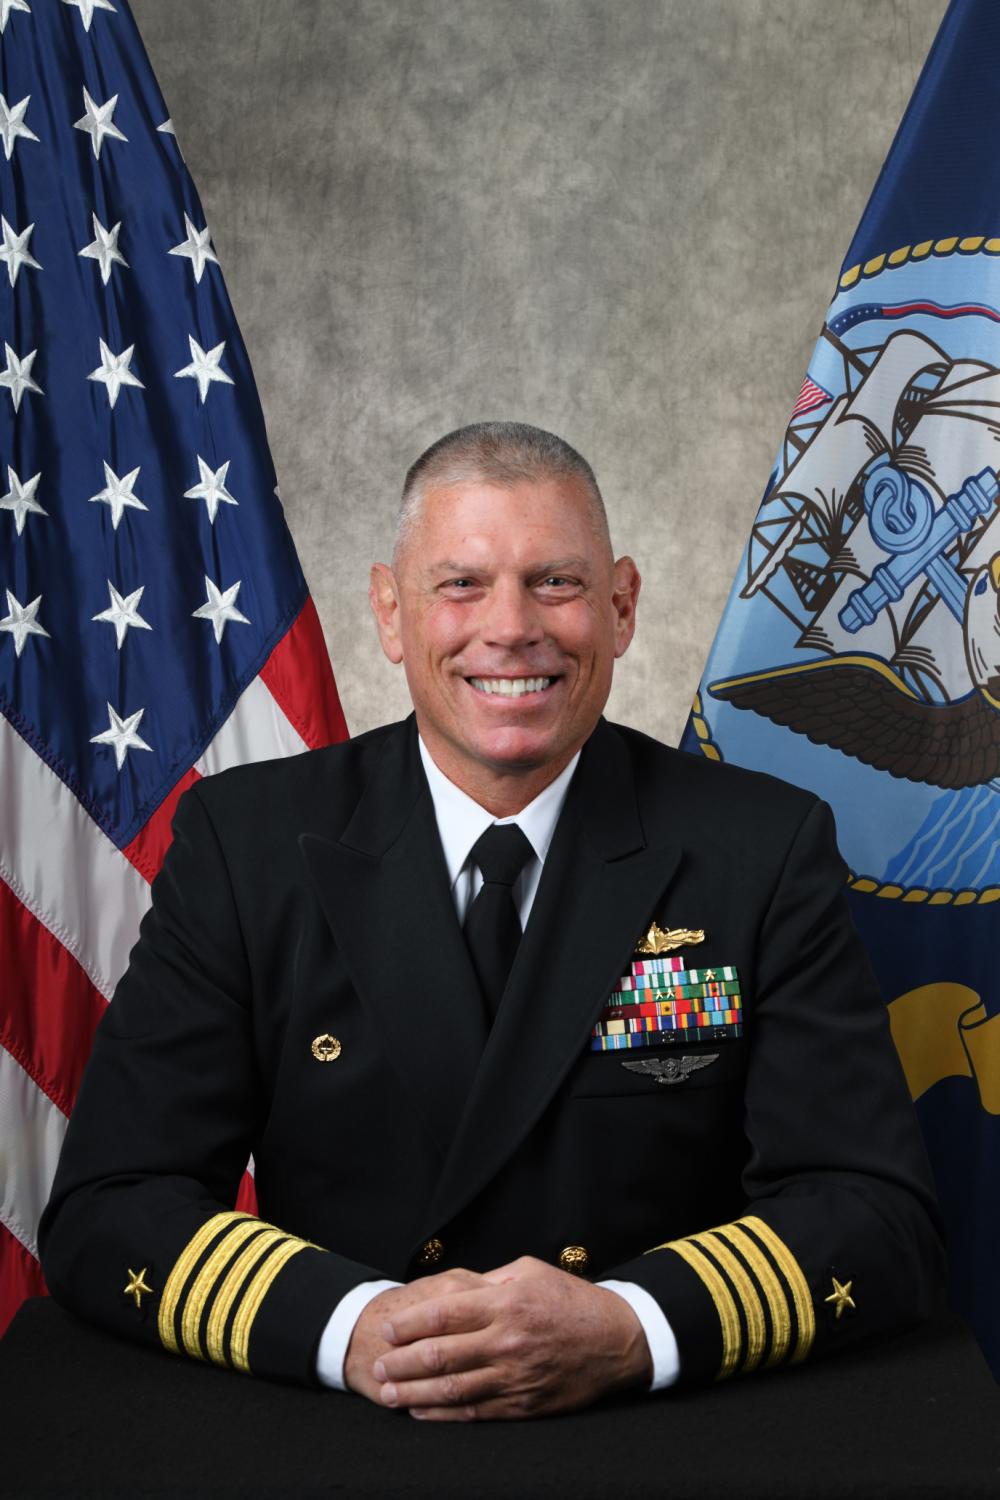 Capt. Anthony Holmes Brings Extensive Fleet Support Experience as New Commanding Officer of Naval Surface Warfare Center, Port Hueneme Division